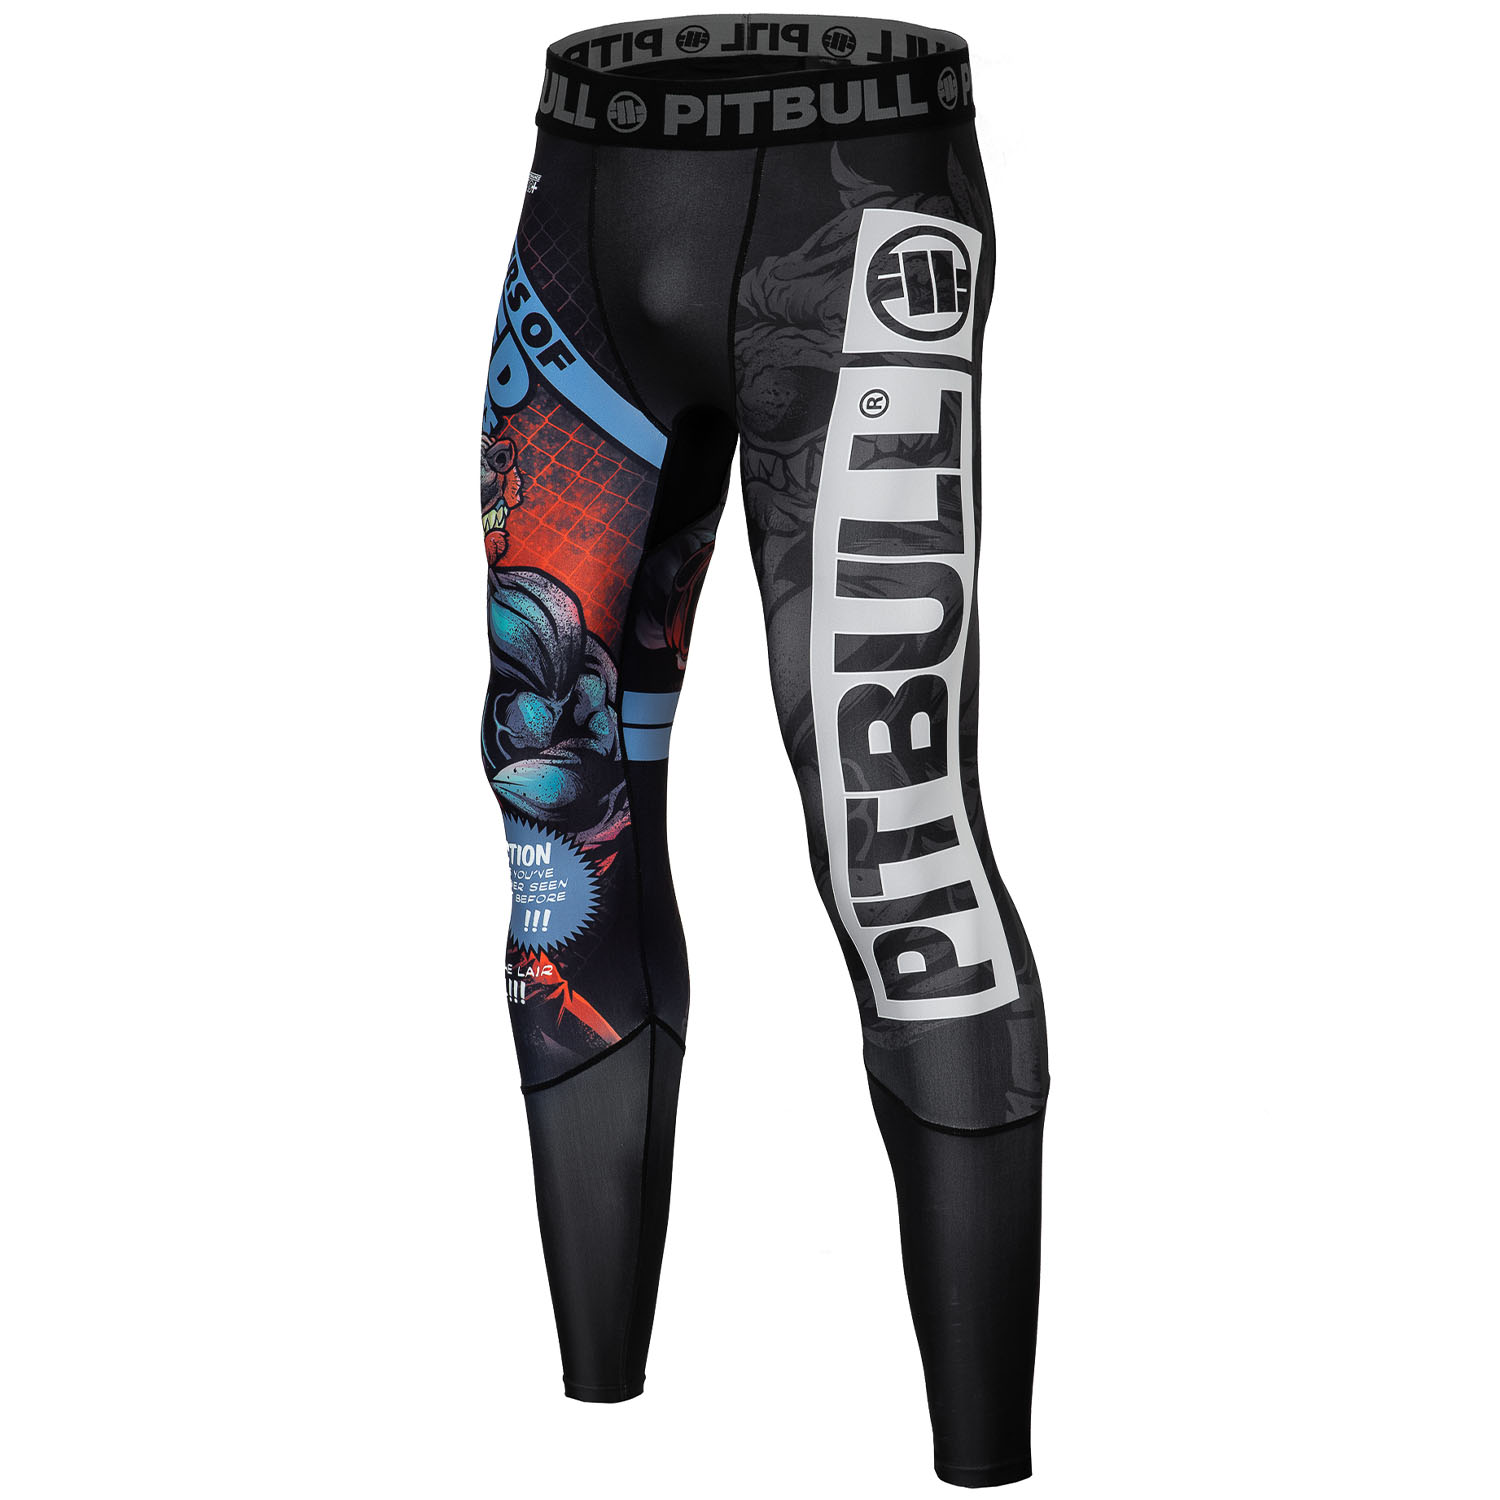 Pit Bull West Coast Compression Pants, Masters Of MMA, schwarz, S